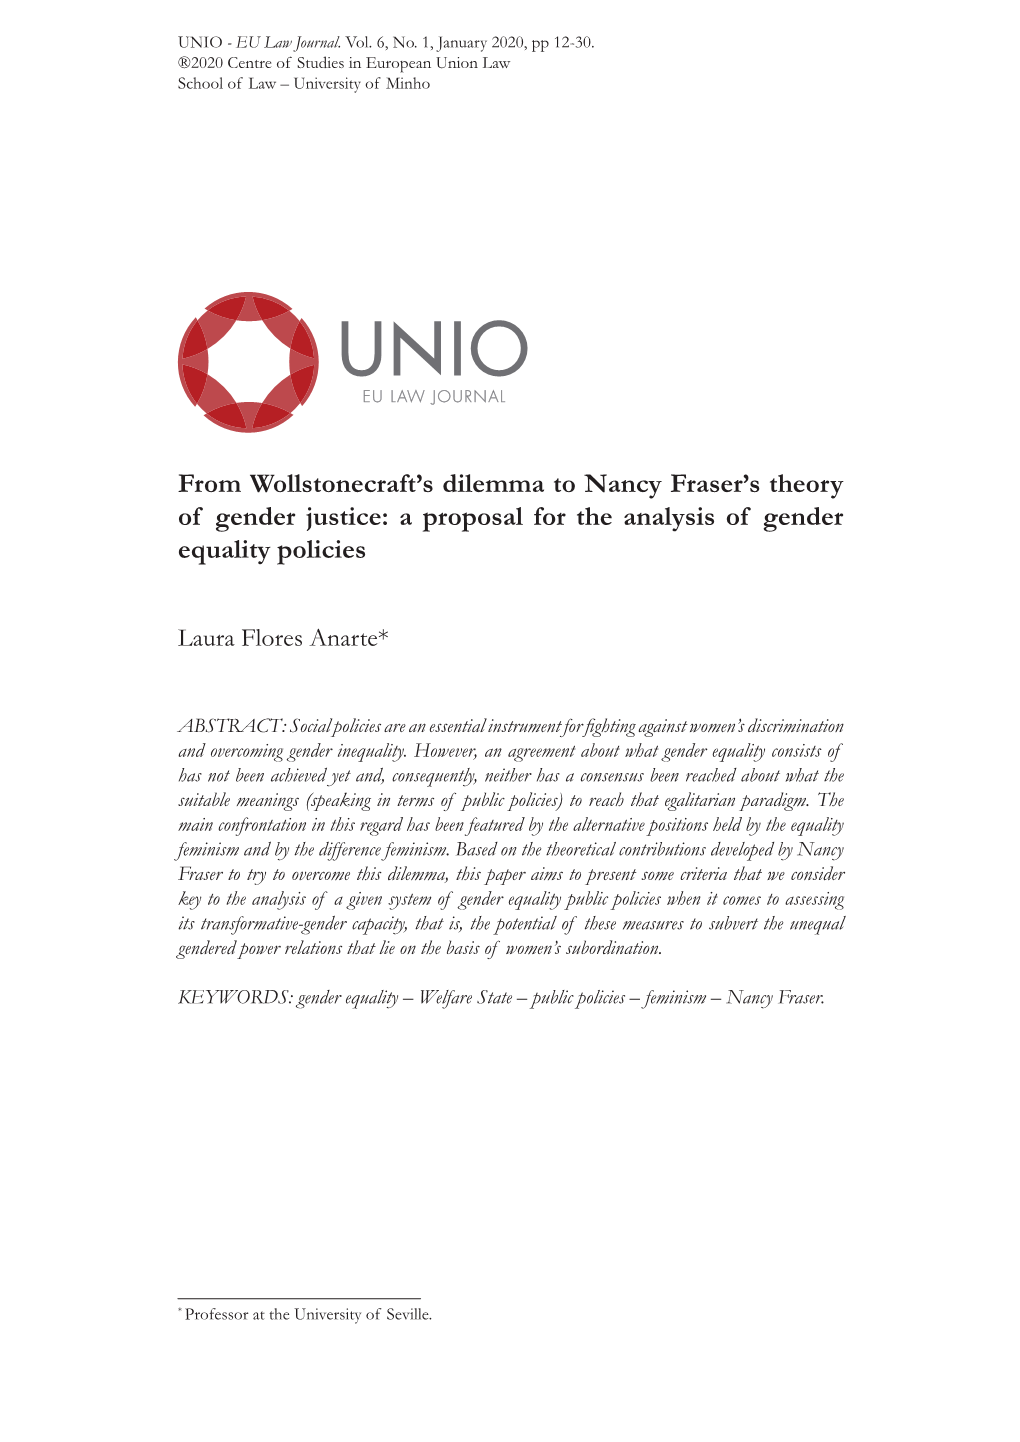 From Wollstonecraft's Dilemma to Nancy Fraser's Theory of Gender Justice: a Proposal for the Analysis of Gender Equality